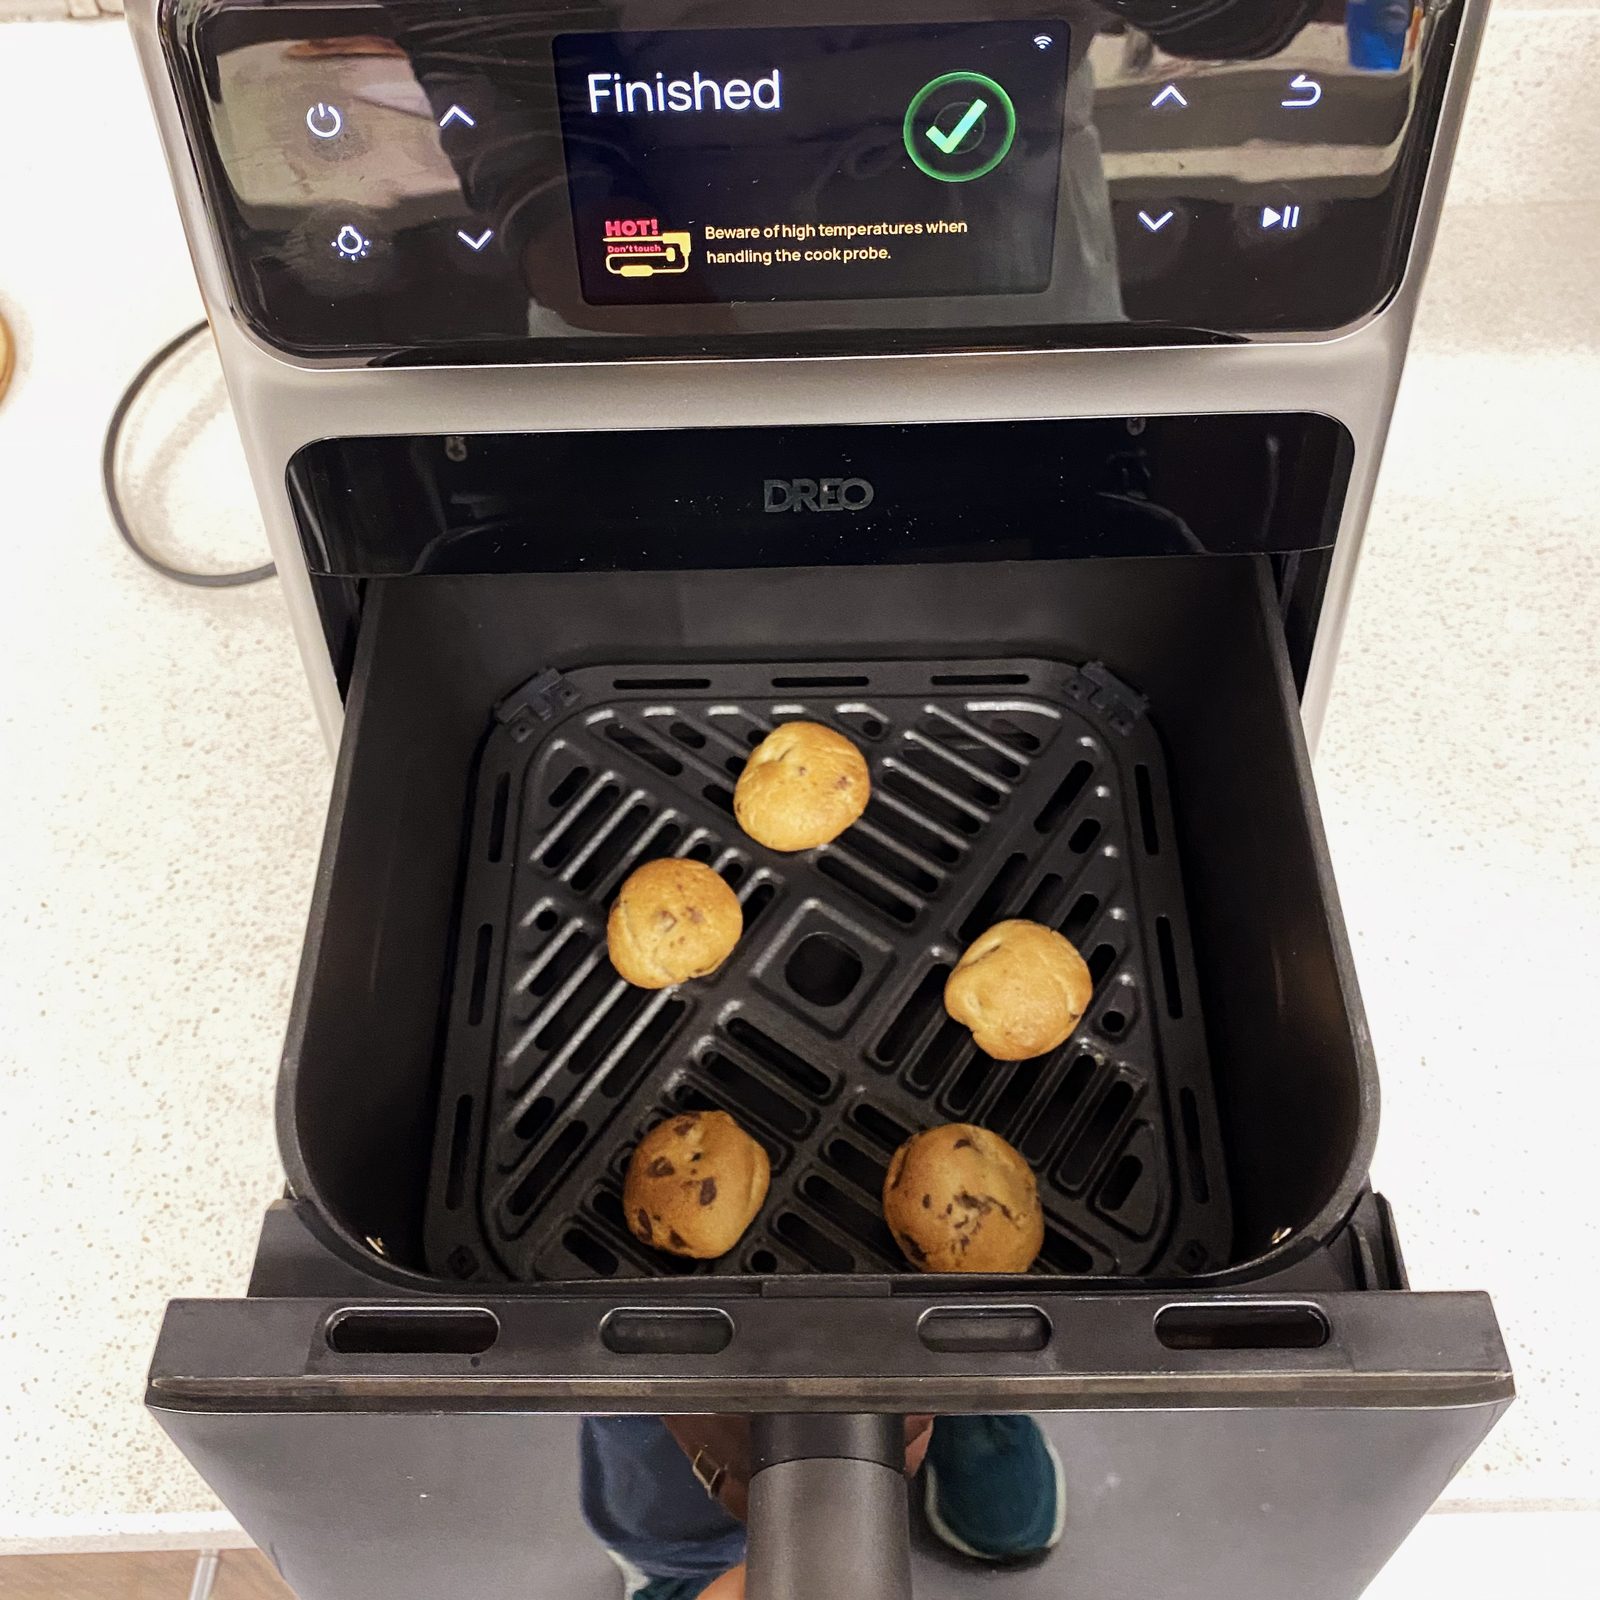 Used Dreo Air Fryer Pro Max 11-in-1 Digital Air Fryer Oven Cooker